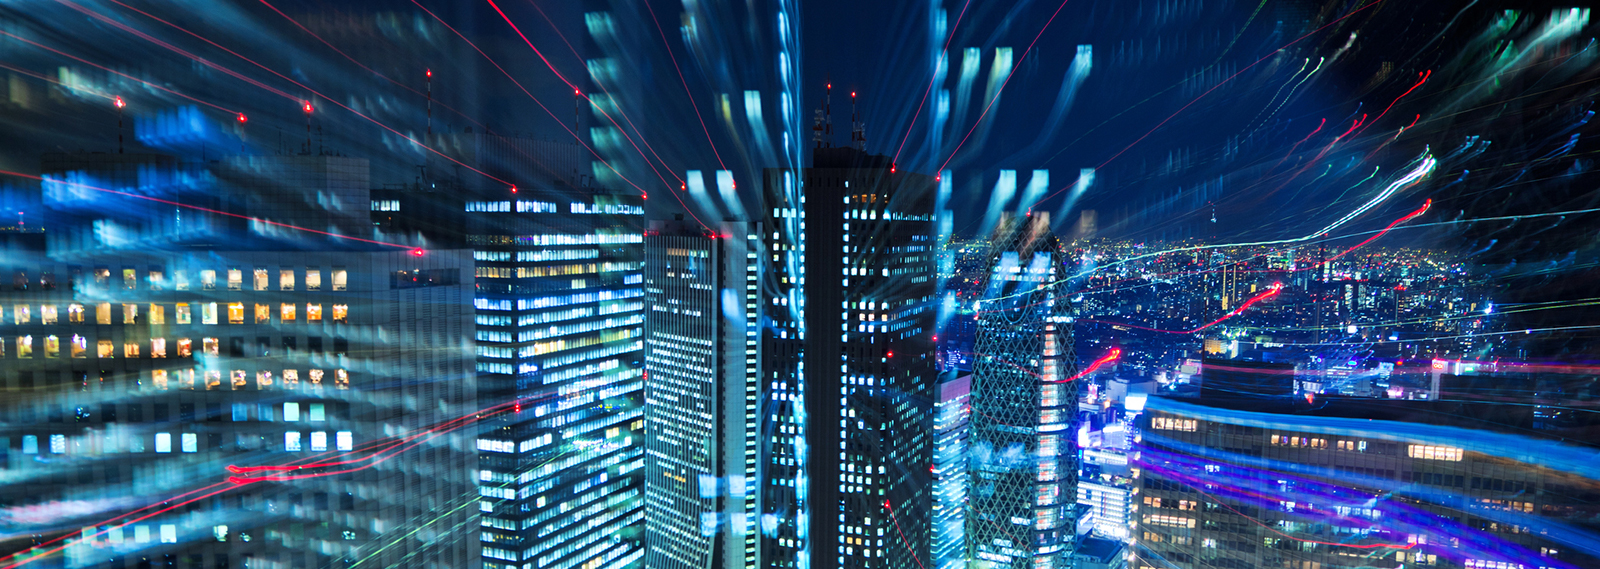 2021 Global Networking Trends Report: Business Resiliency takes center stage – Cisco Blogs